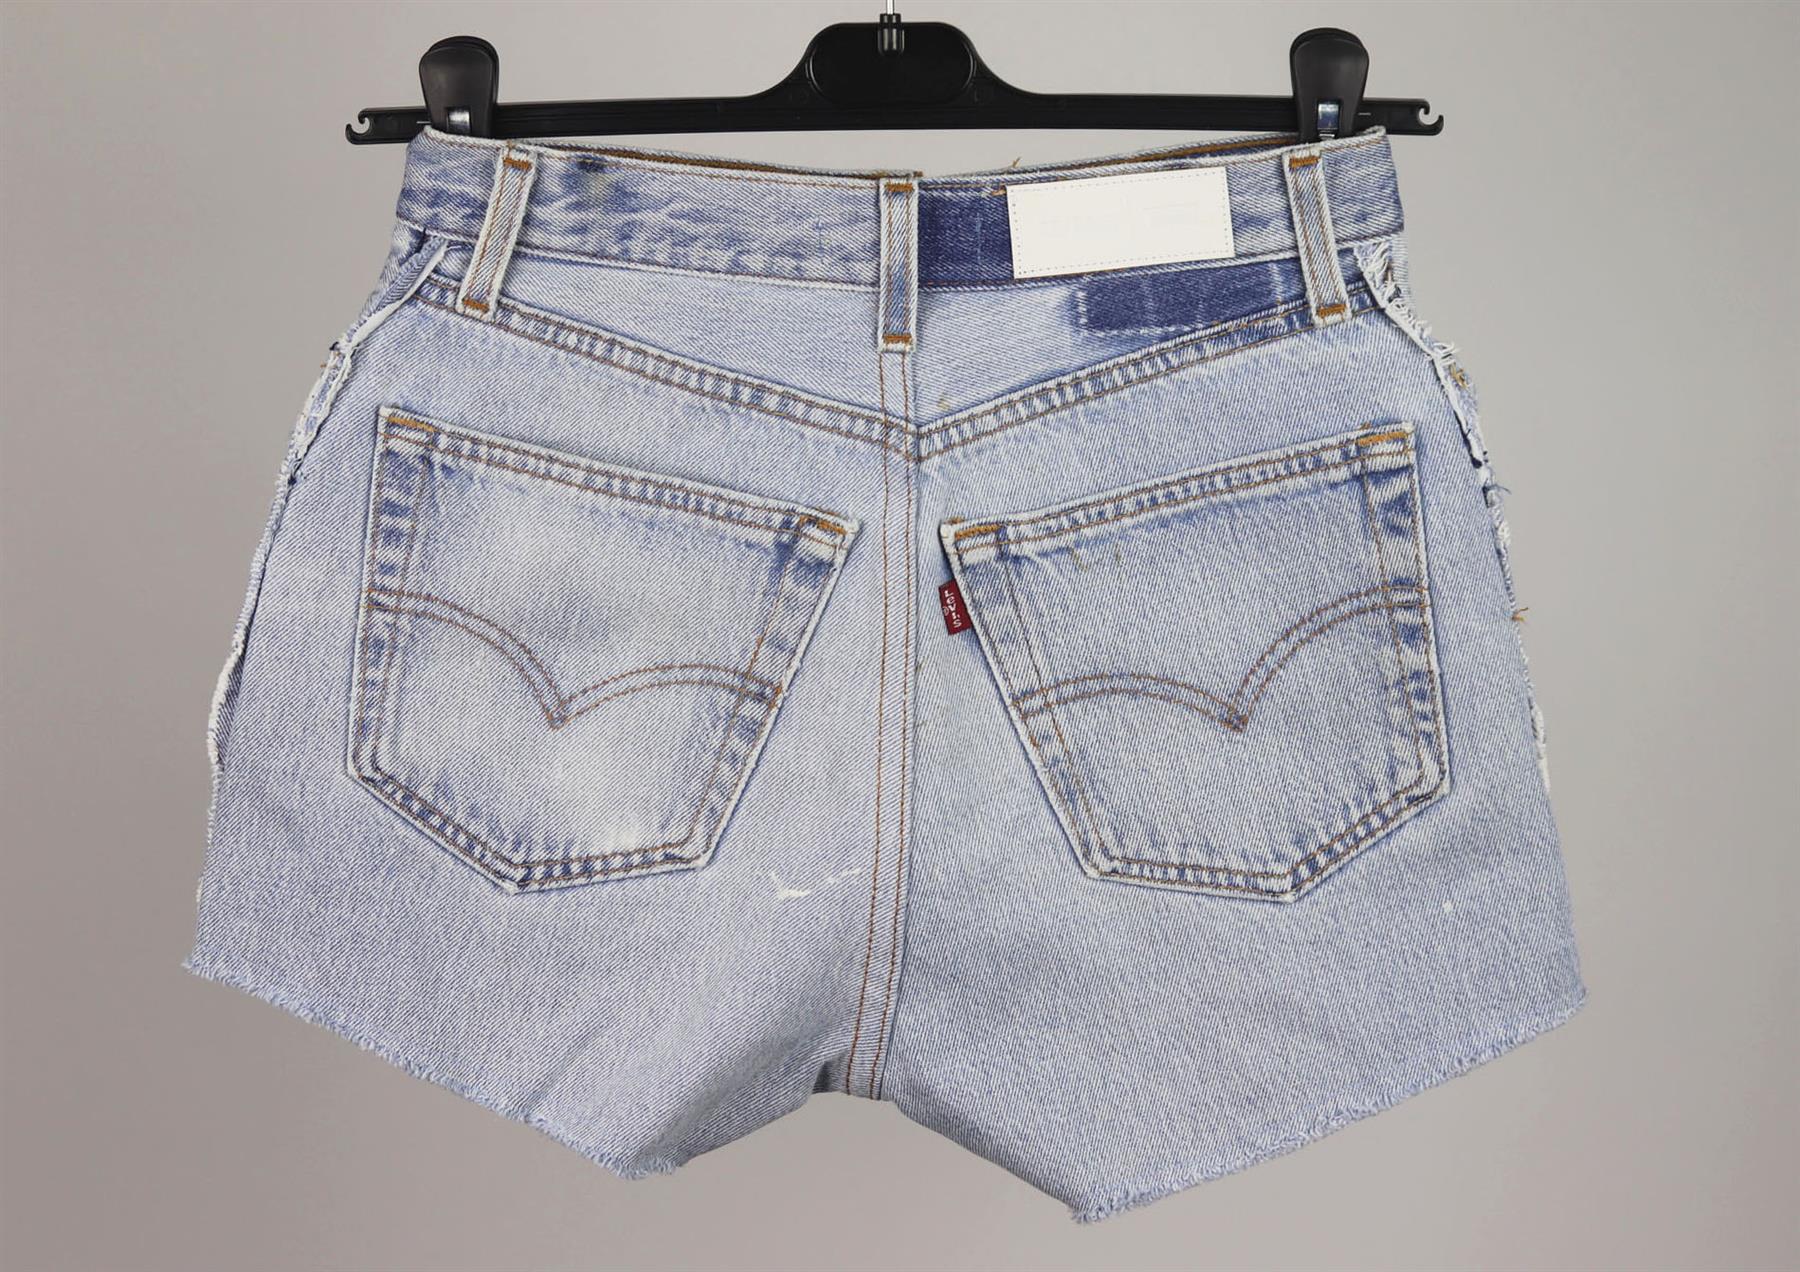 RE/DONE DISTRESSED HIGH WAISTED DENIM SHORTS W24 UK 6